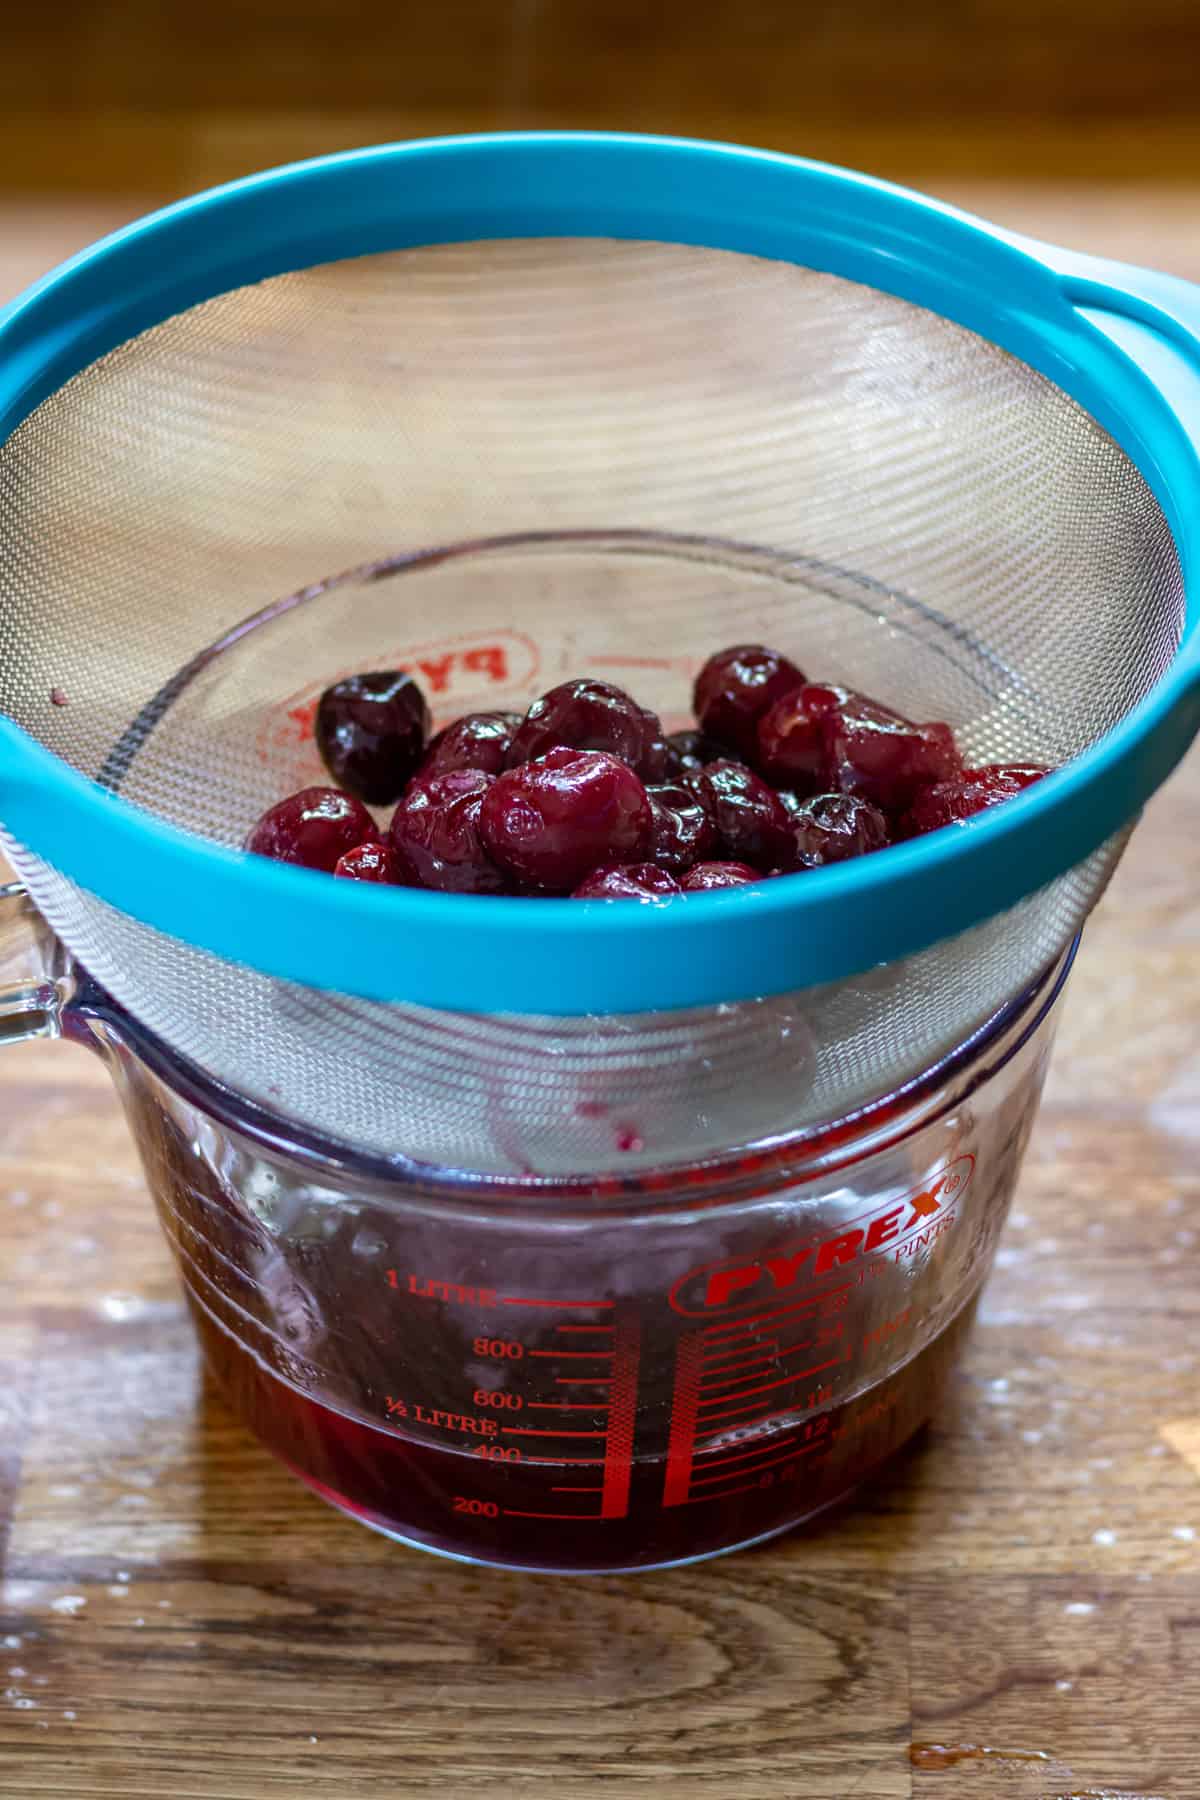 Straining the cherry syrup.